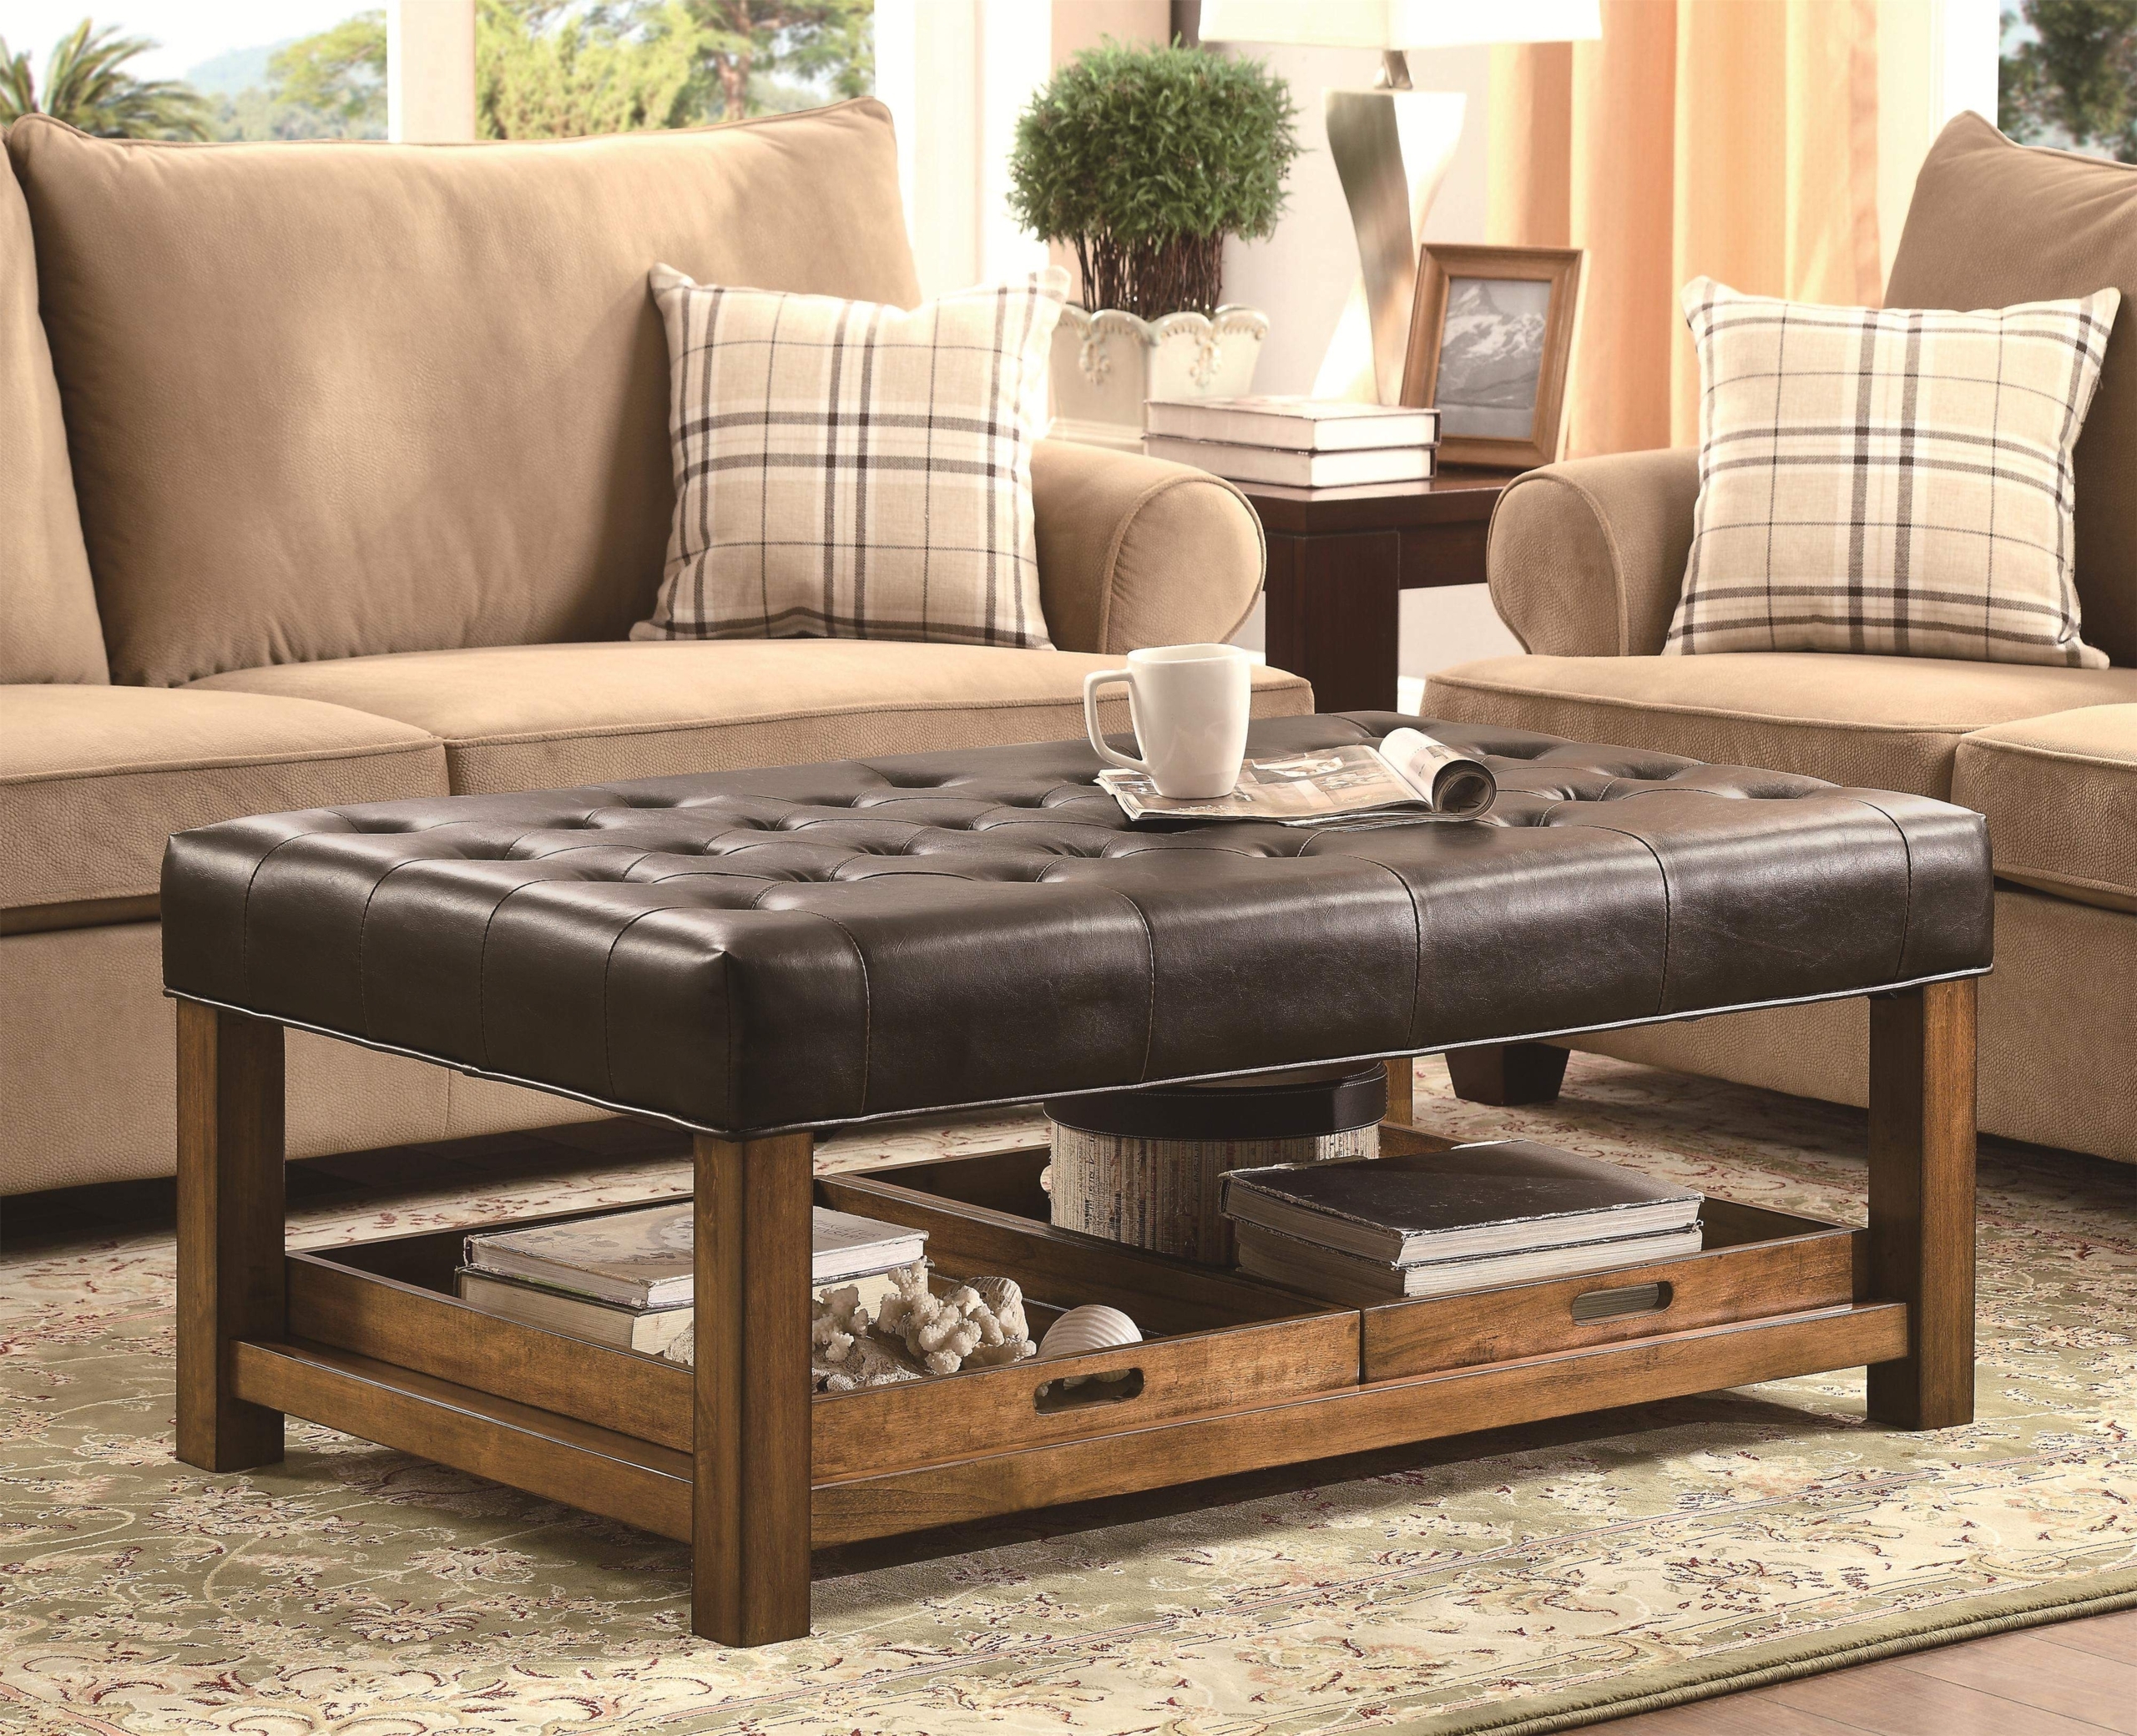 Leather Tufted Ottoman Coffee Table Ideas On Foter